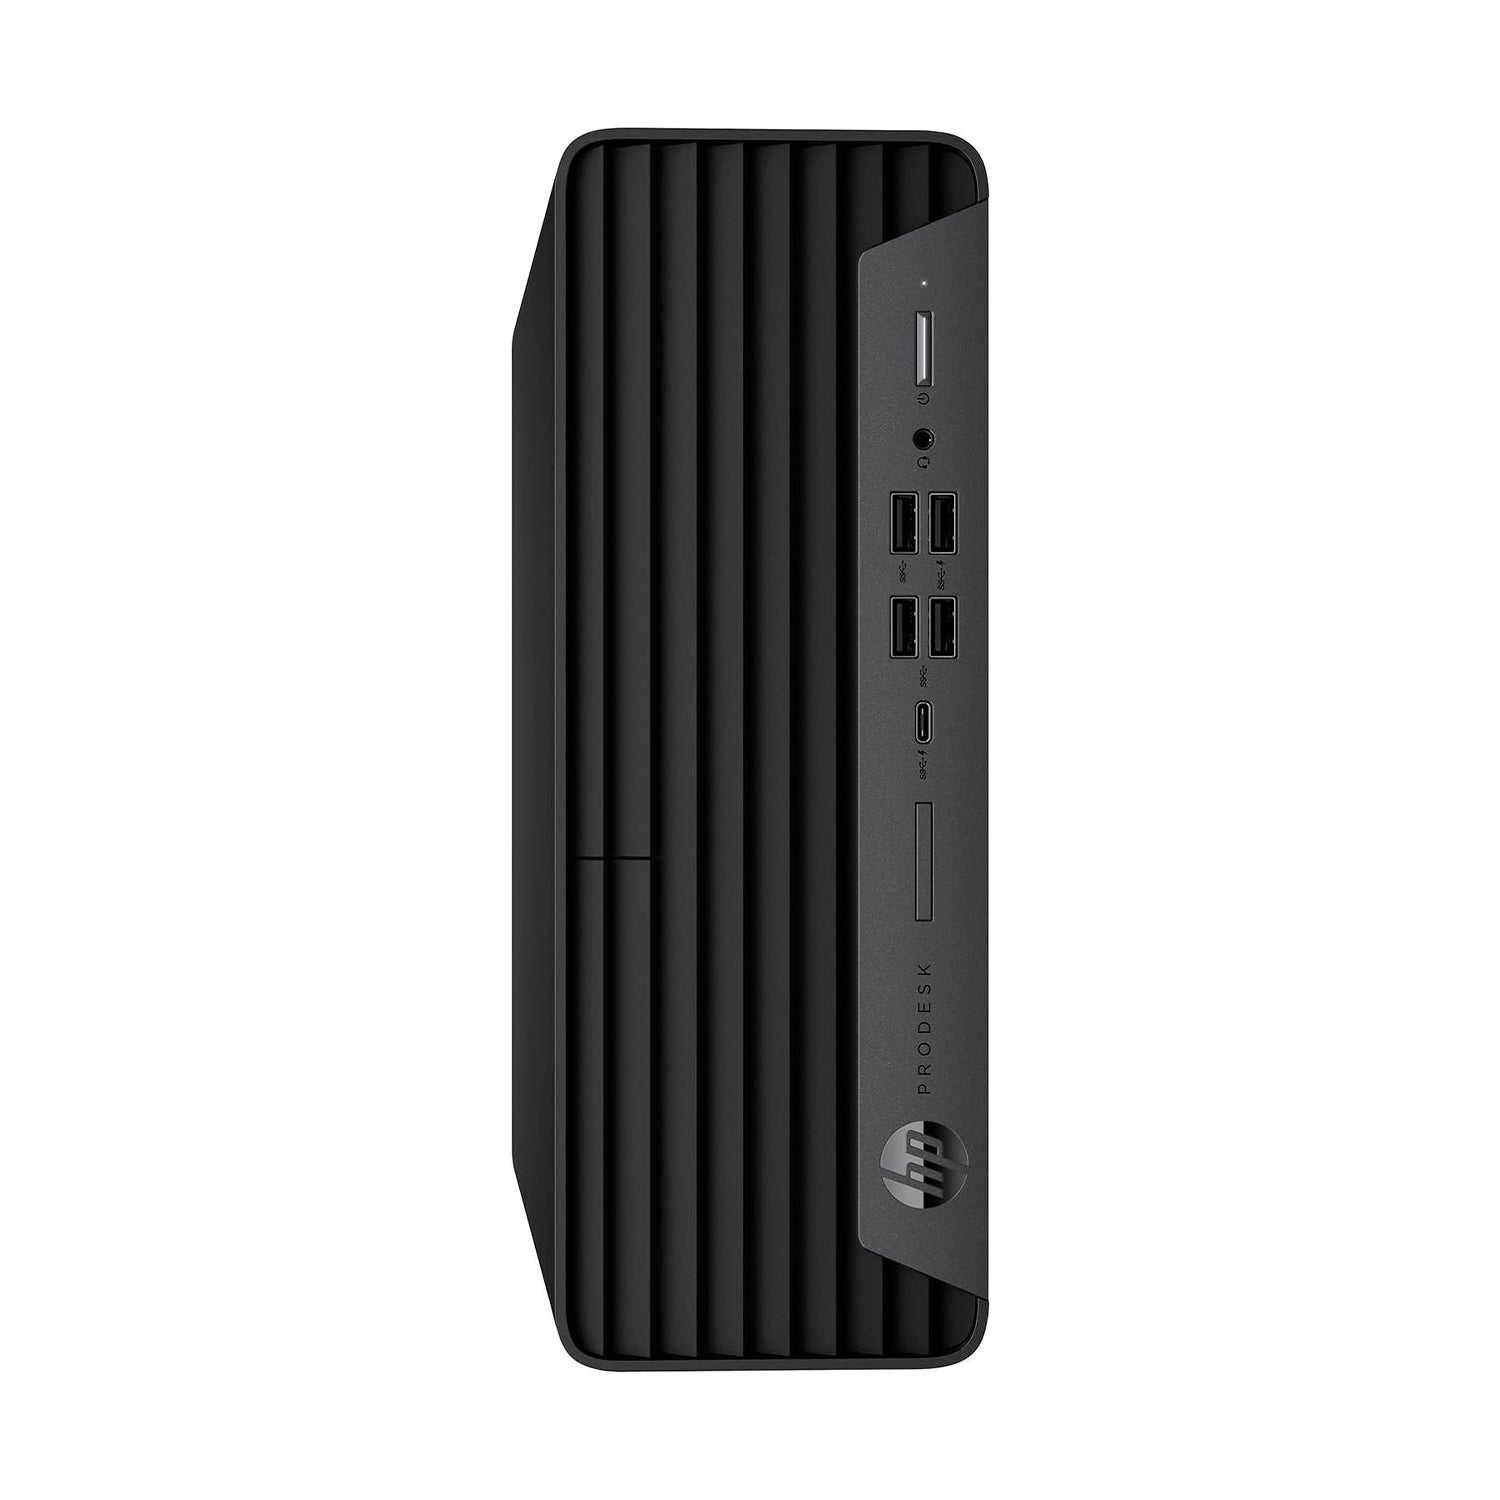 HP ProDesk 600 G6 SFF Business Desktop Computer PC(Intel Core i5 - 10th Gen up to 4.50 GHz Processor| 16GB - 32GB DDR4 RAM| 1TB - 2TB SSD| WINDOWS 11 PRO) Wireless Keyboard and Mouse - Refurbished